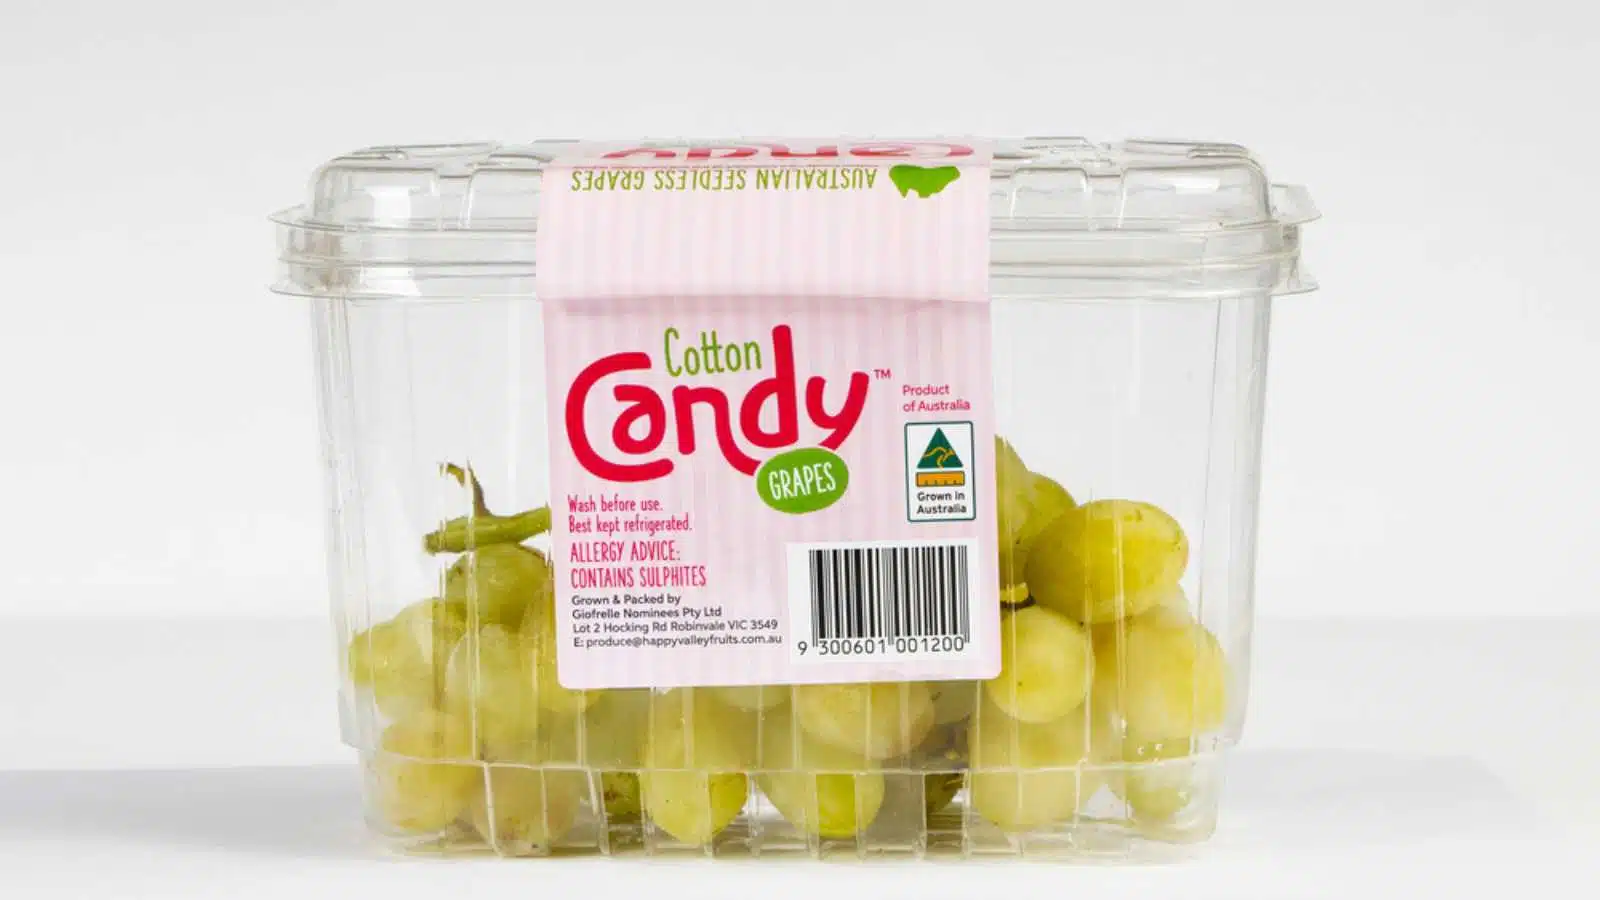 Brisbane, Australia - March 2 2021: Cotton Candy Grapes that taste like Fairy Floss. Healthy sweet treat seedless variety.